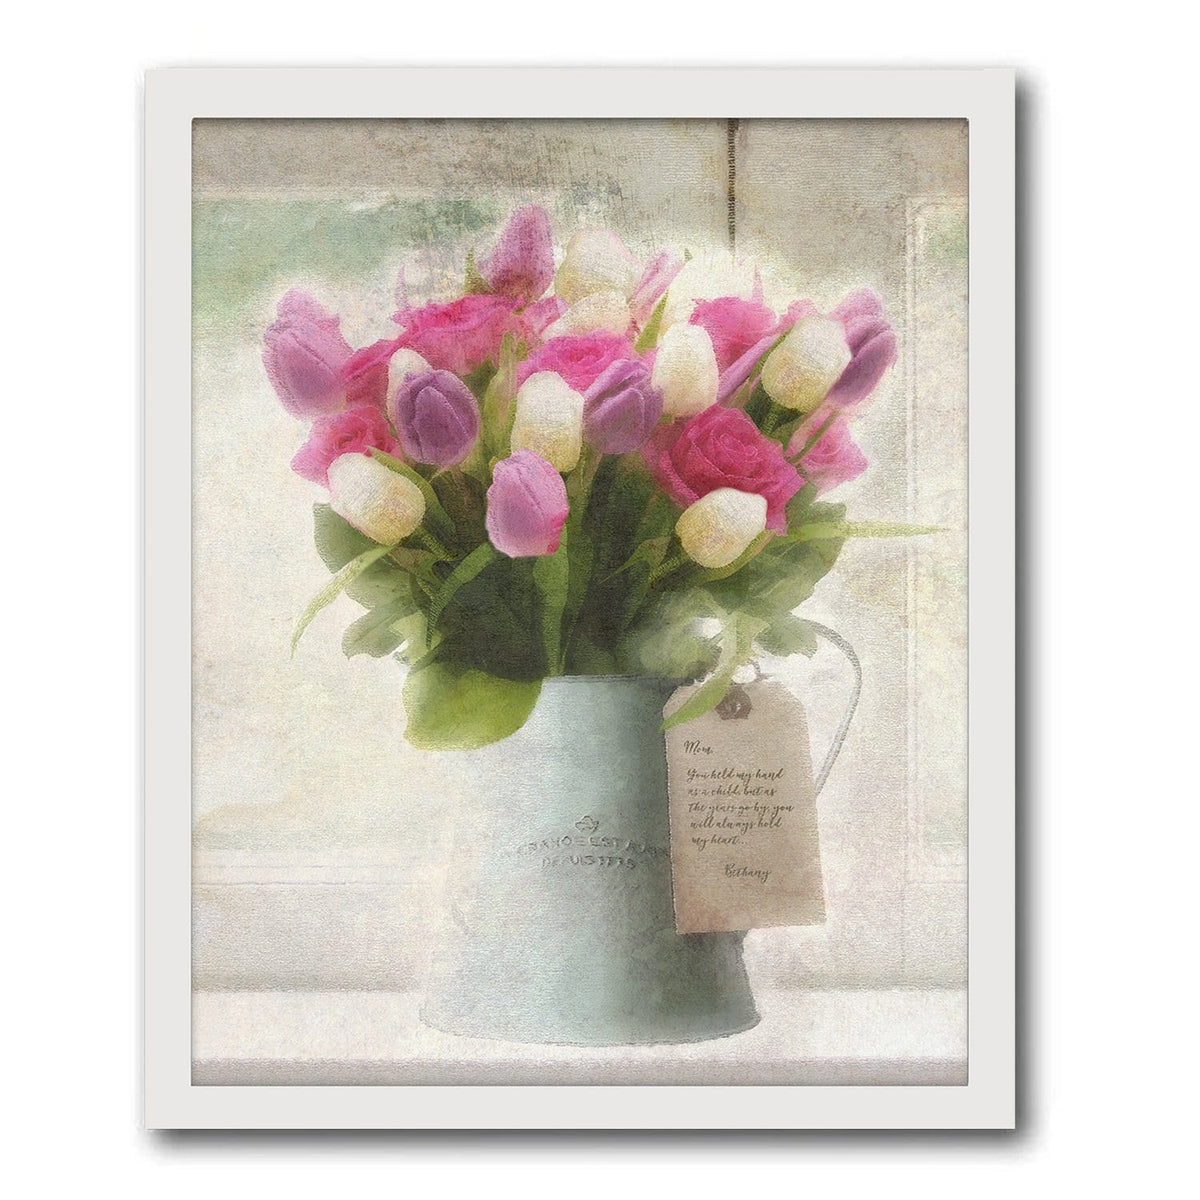 Framed Canvas Flower Art - Personalized Gift from Personal-Prints